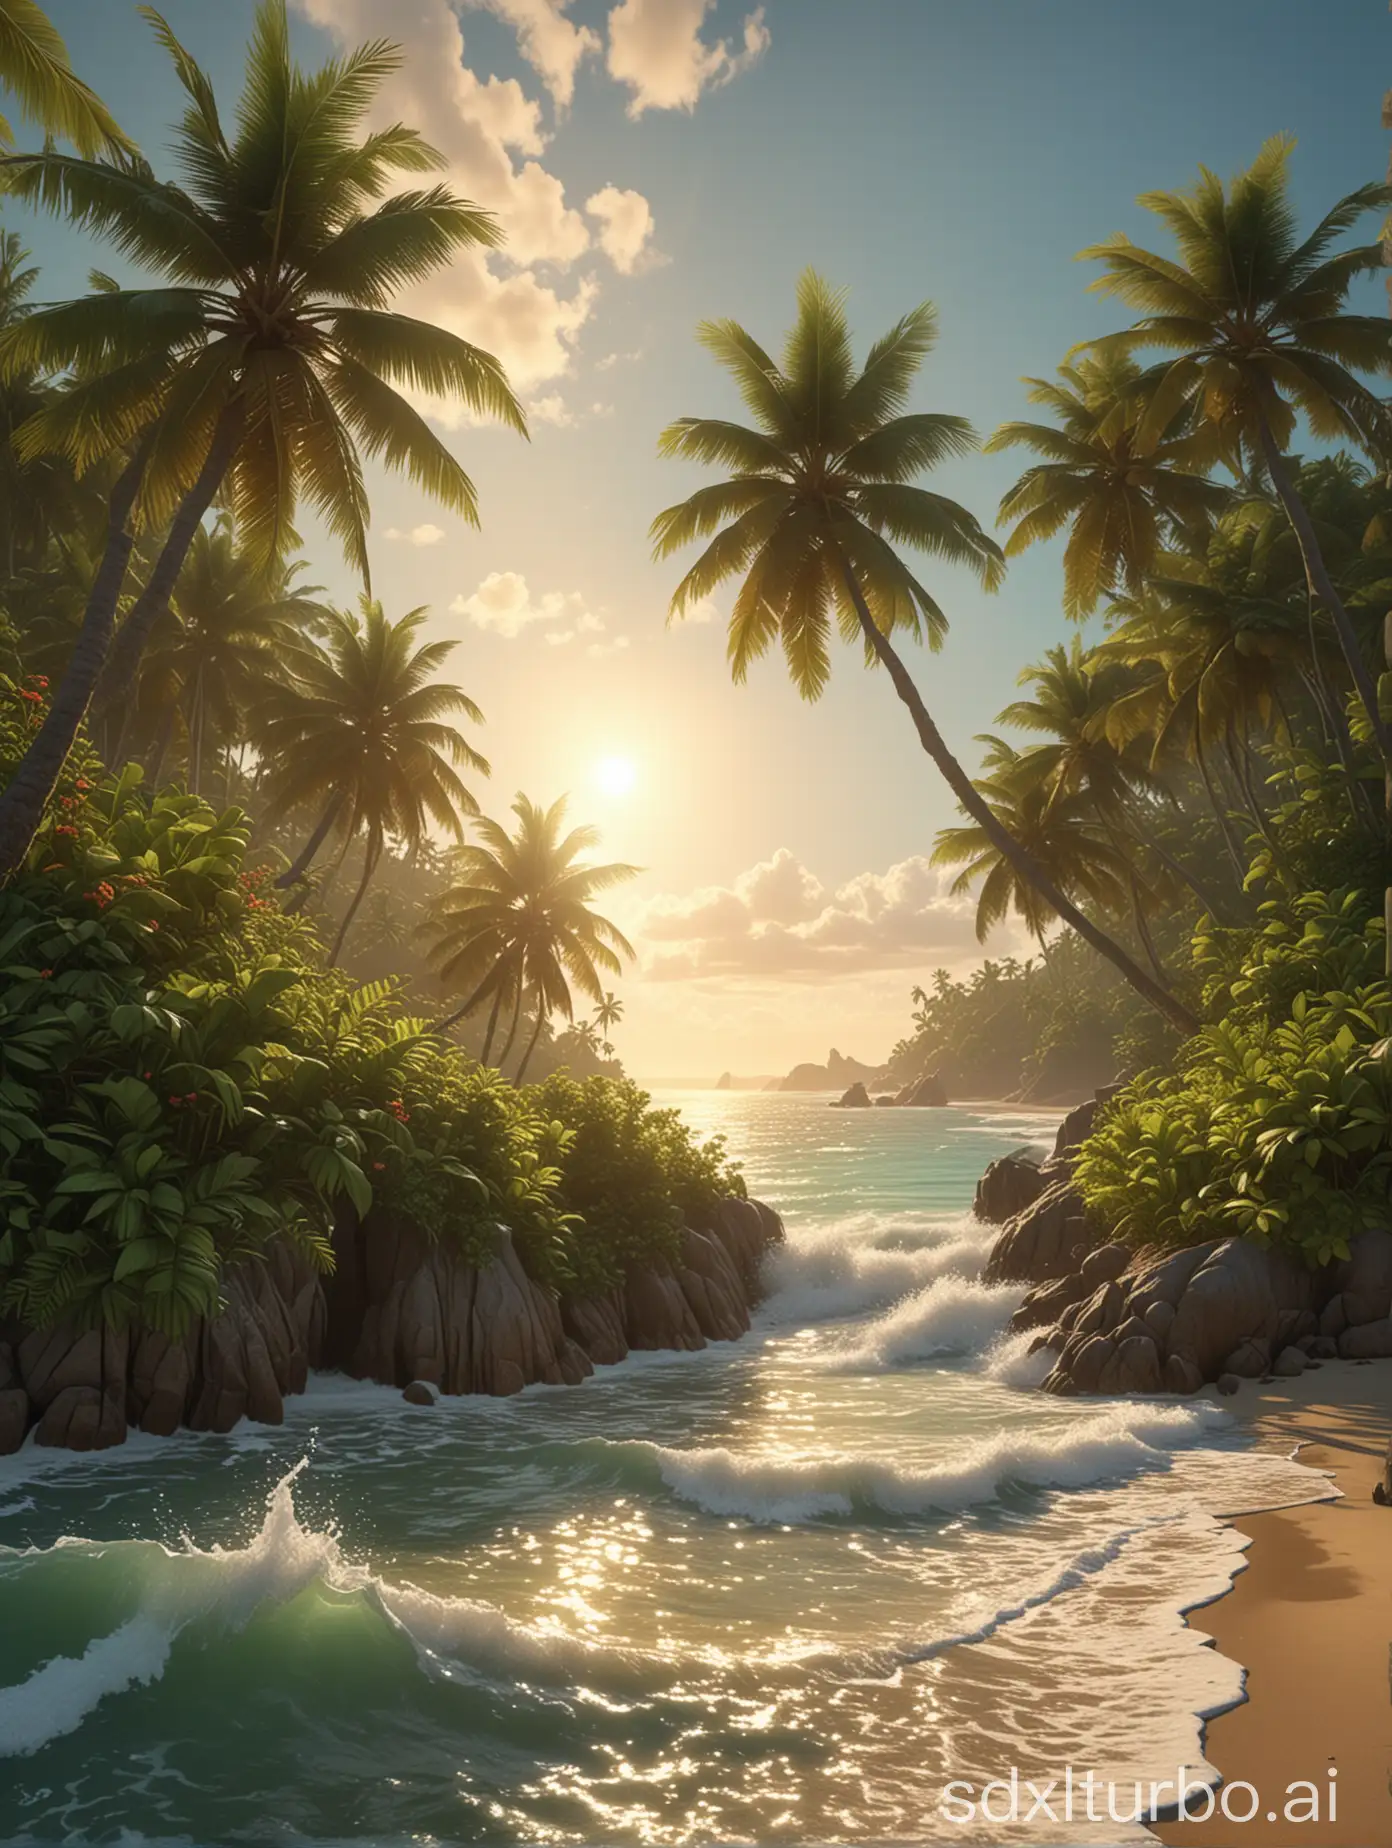 Tropical-Paradise-Sunlit-Beach-with-Coconut-Trees-and-Ocean-Waves